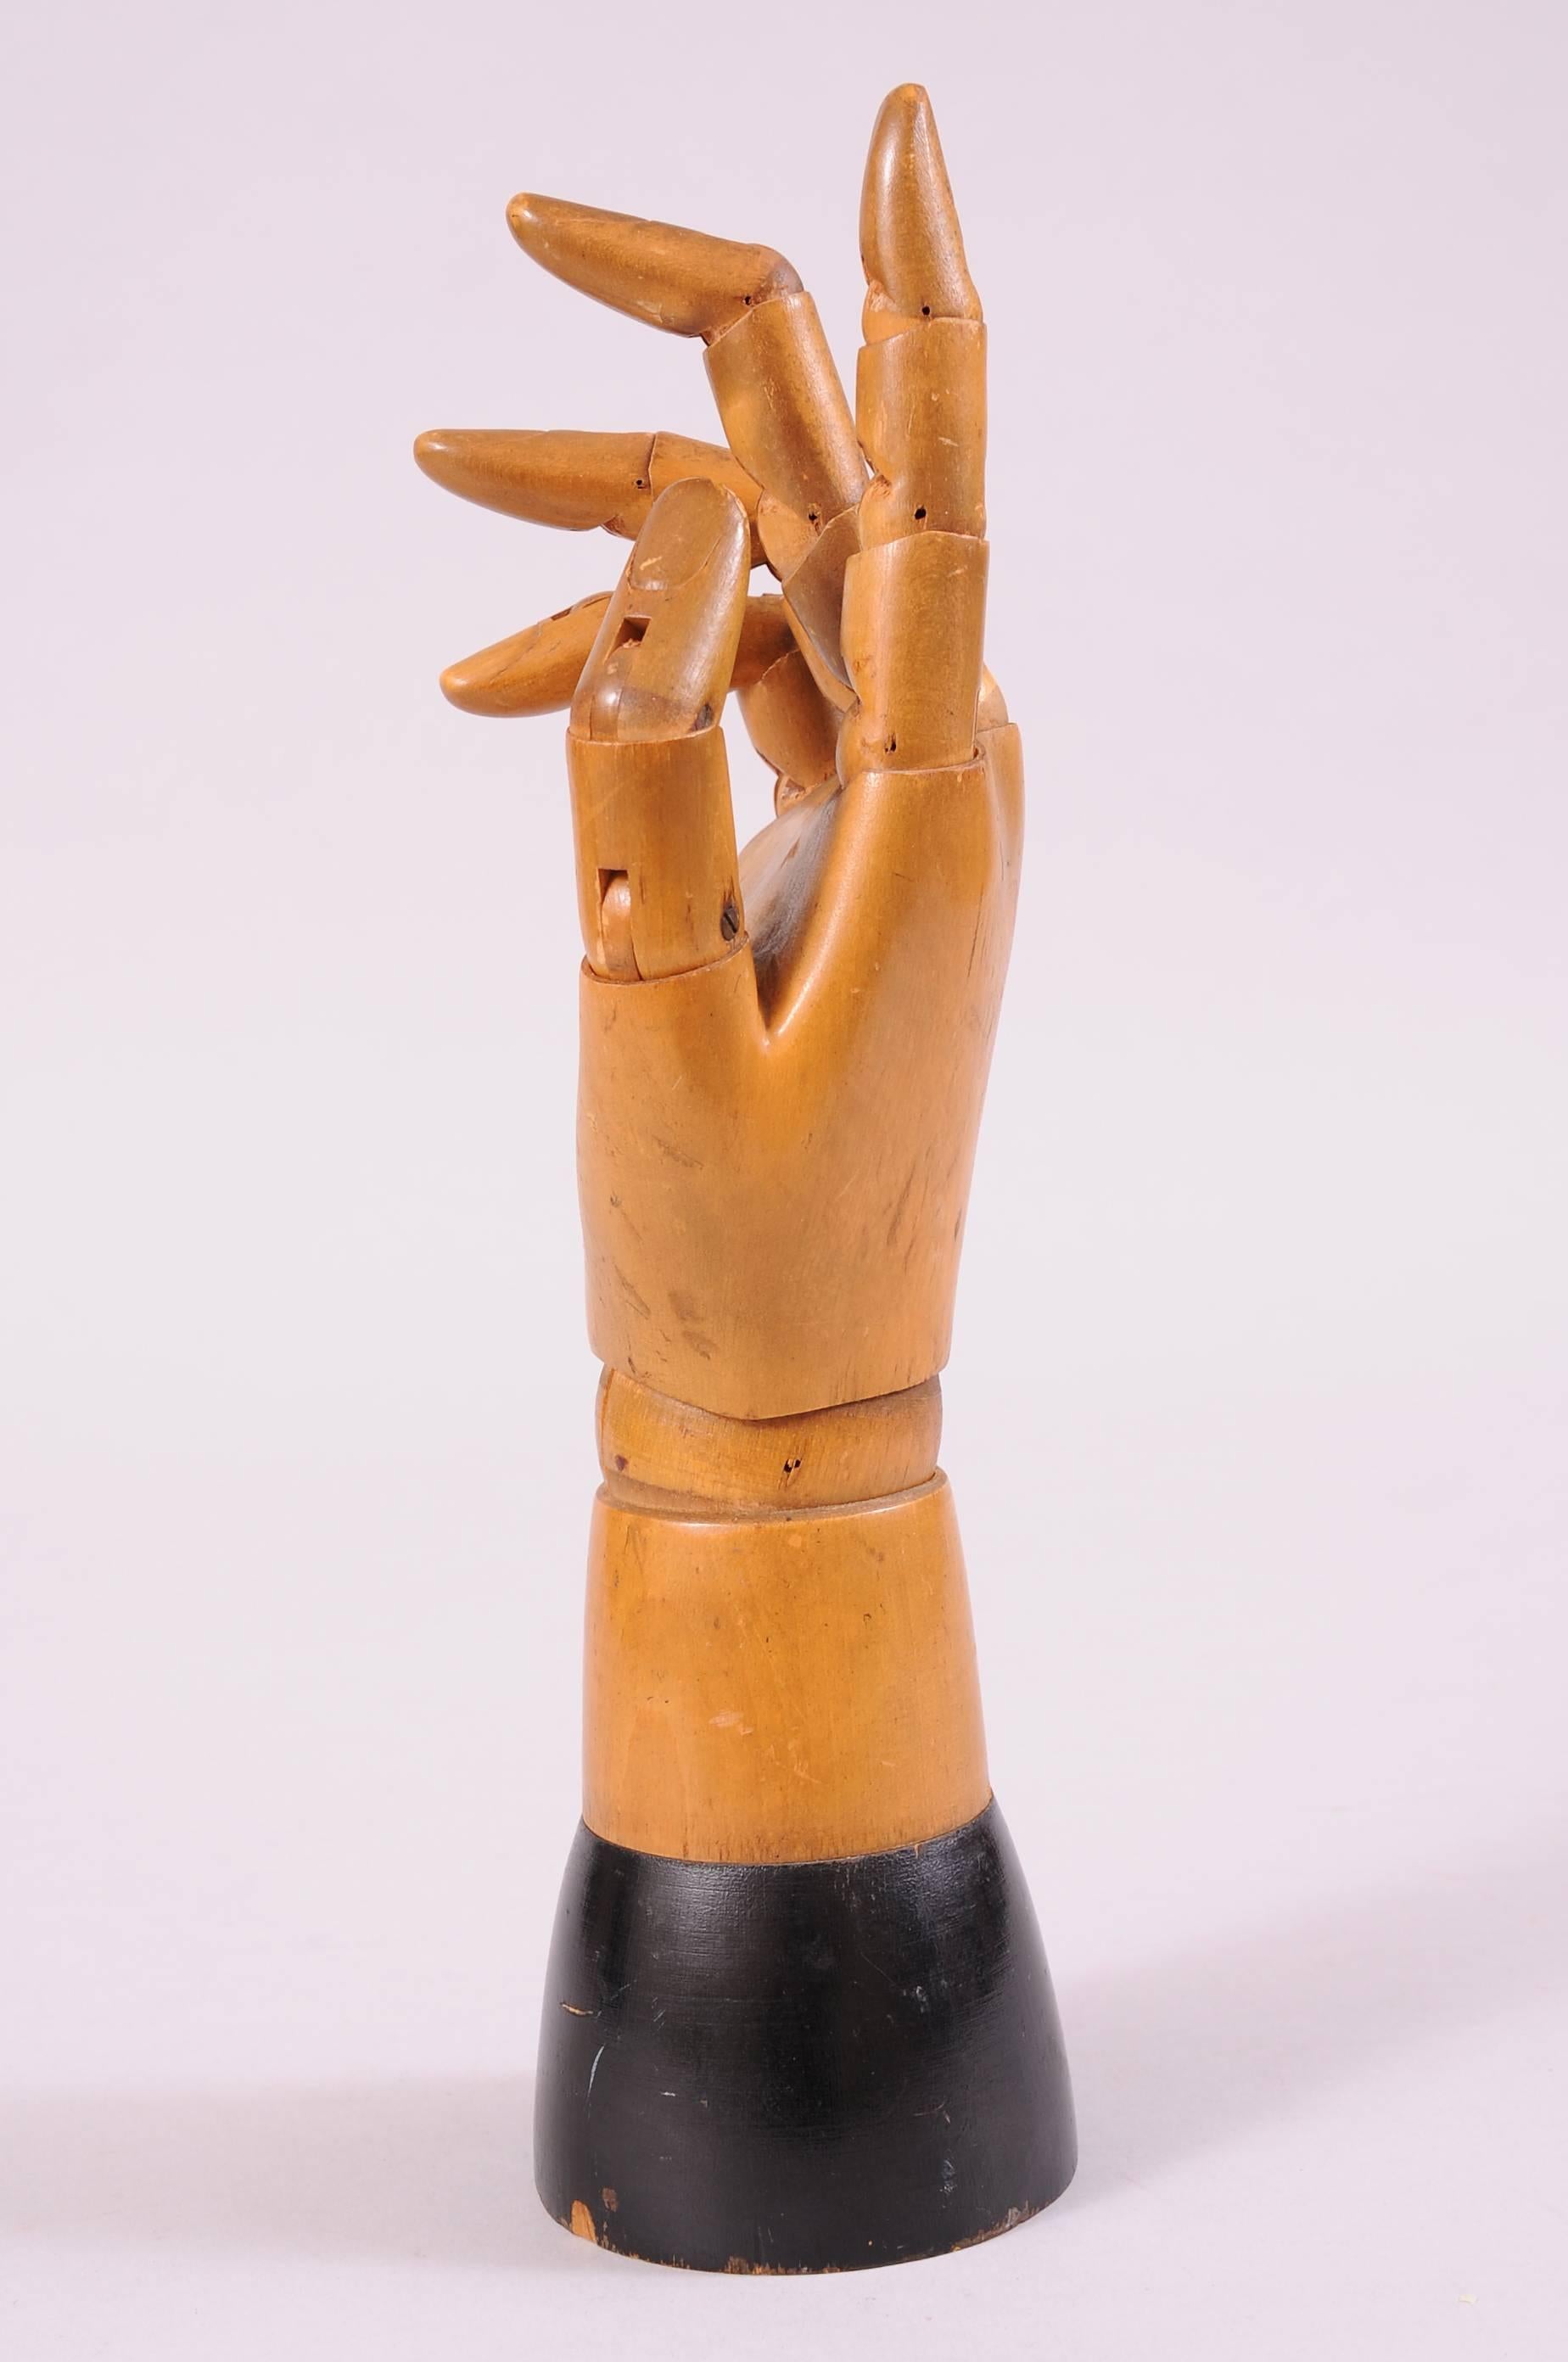 This striking sculptural life size model of a hand was made in Belgium in the early part of the 20th century. The joints are fully articulated at the wrist and all of the finger joints allowing you to change the position of the hand.  it would be a